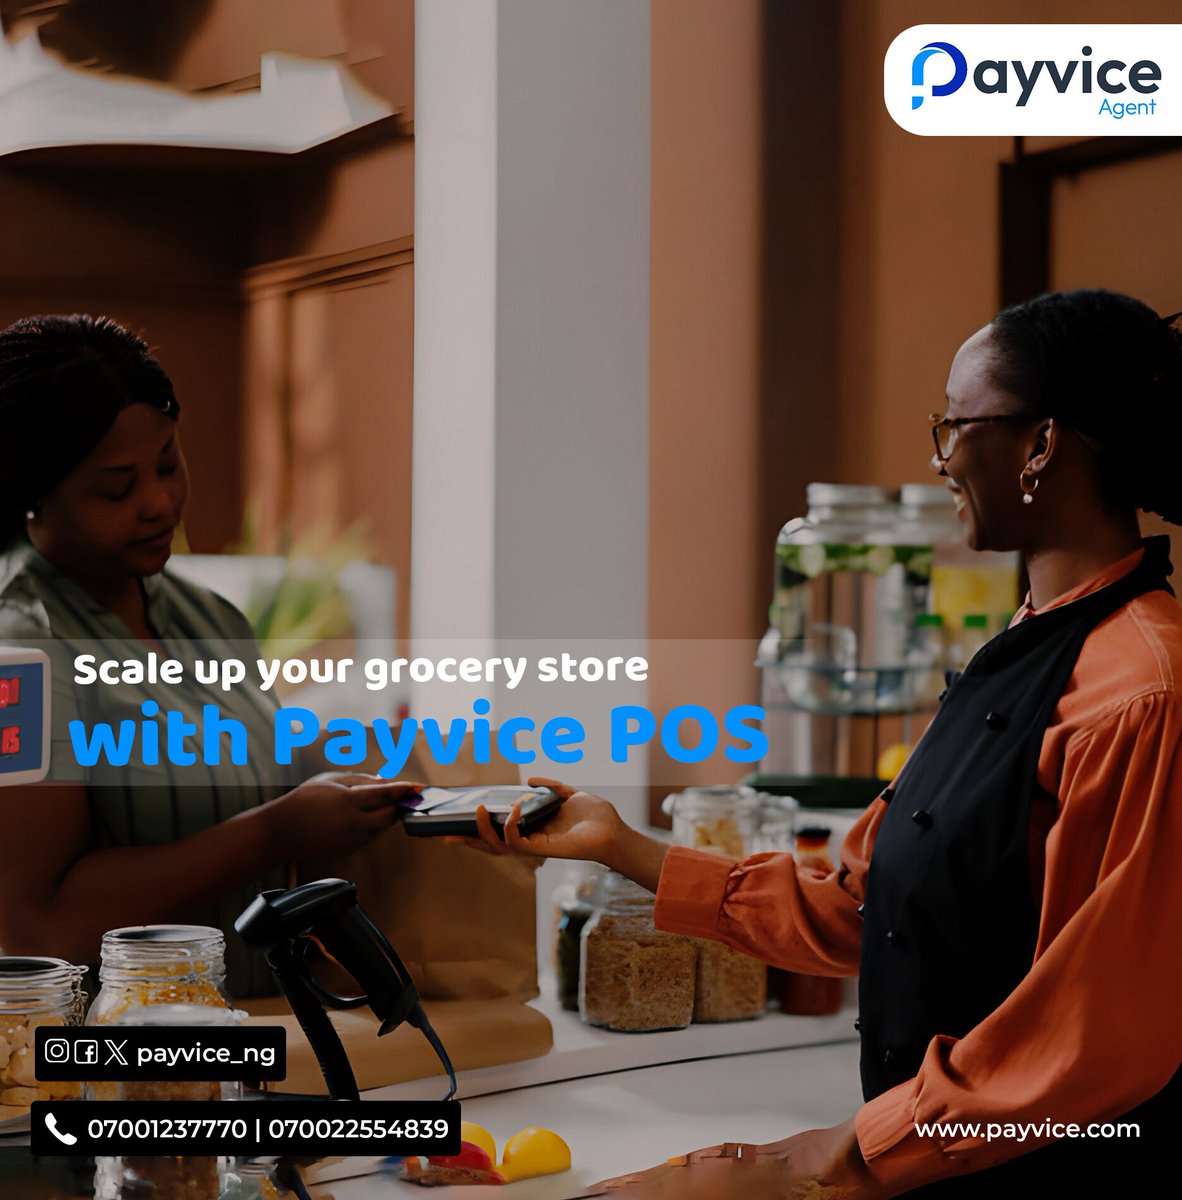 Whether you are collecting payments from customers or simply offering cash withdrawal, money transfers and bill payment services, Payvice will earn you more income.

To get a POS device, send us a DM

#POSAgent
#PayvicePadi
#BillsPayments
#Cashwithdrawal
#MoneyTransfer